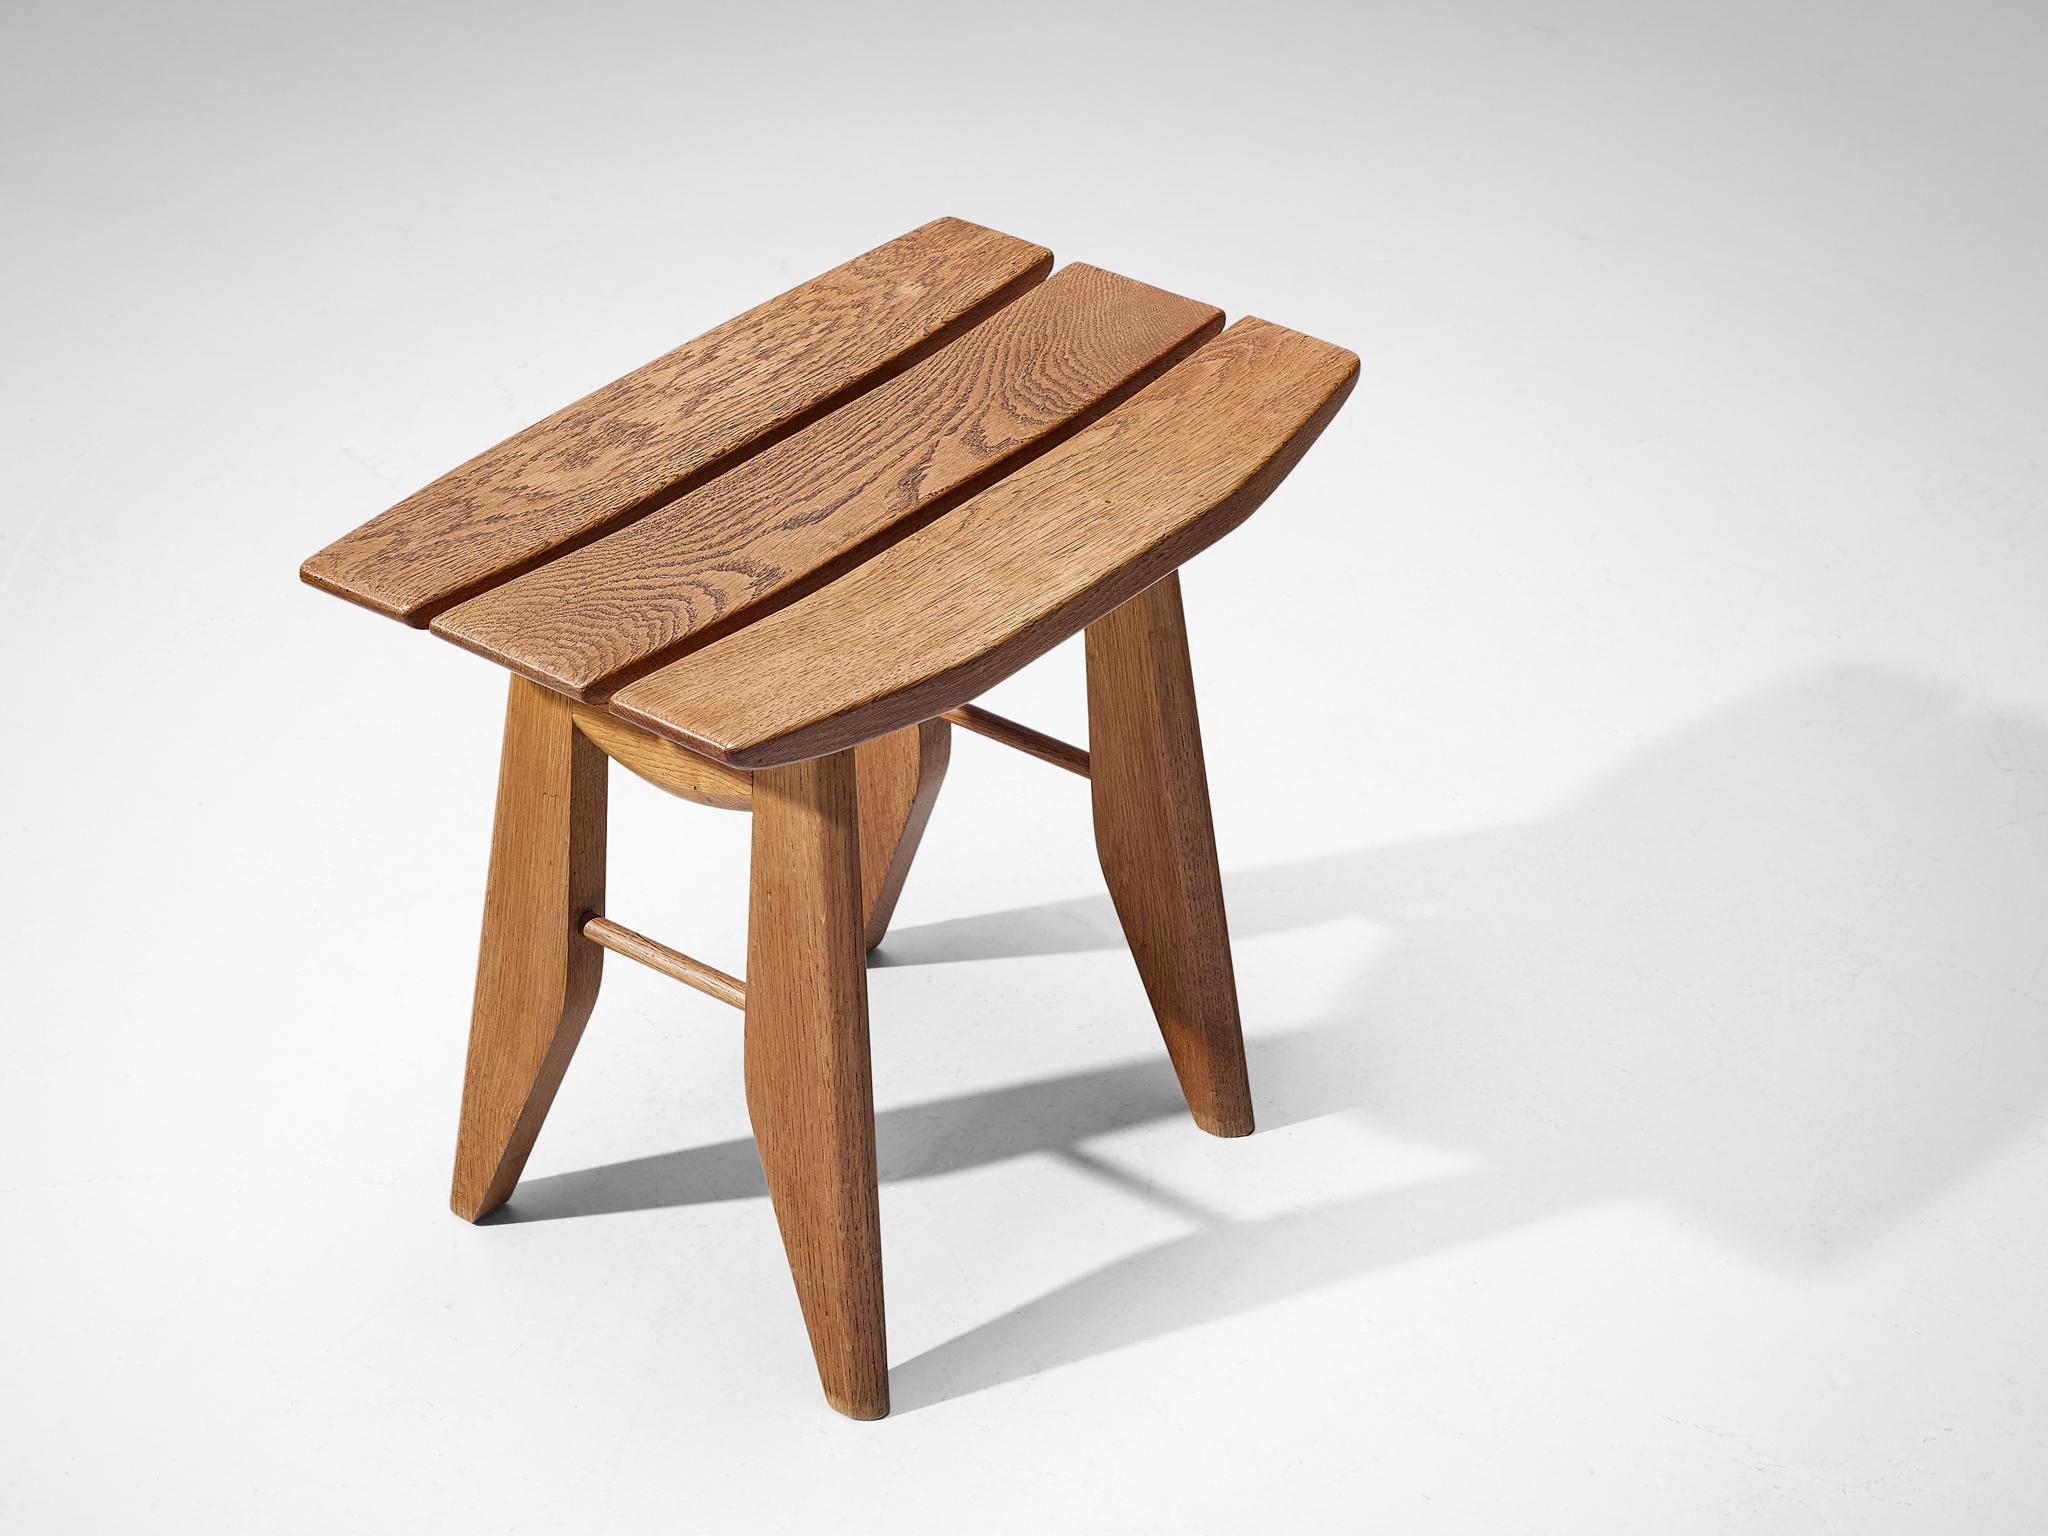 Guillerme et Chambron for Votre Maison, stool, solid oak, France, 1960s.

This oak tabouret, designed by the French duo Guillerme and Chambron, boasts a sculptural form with distinct Japanese influences. The seat is composed of three slats, with